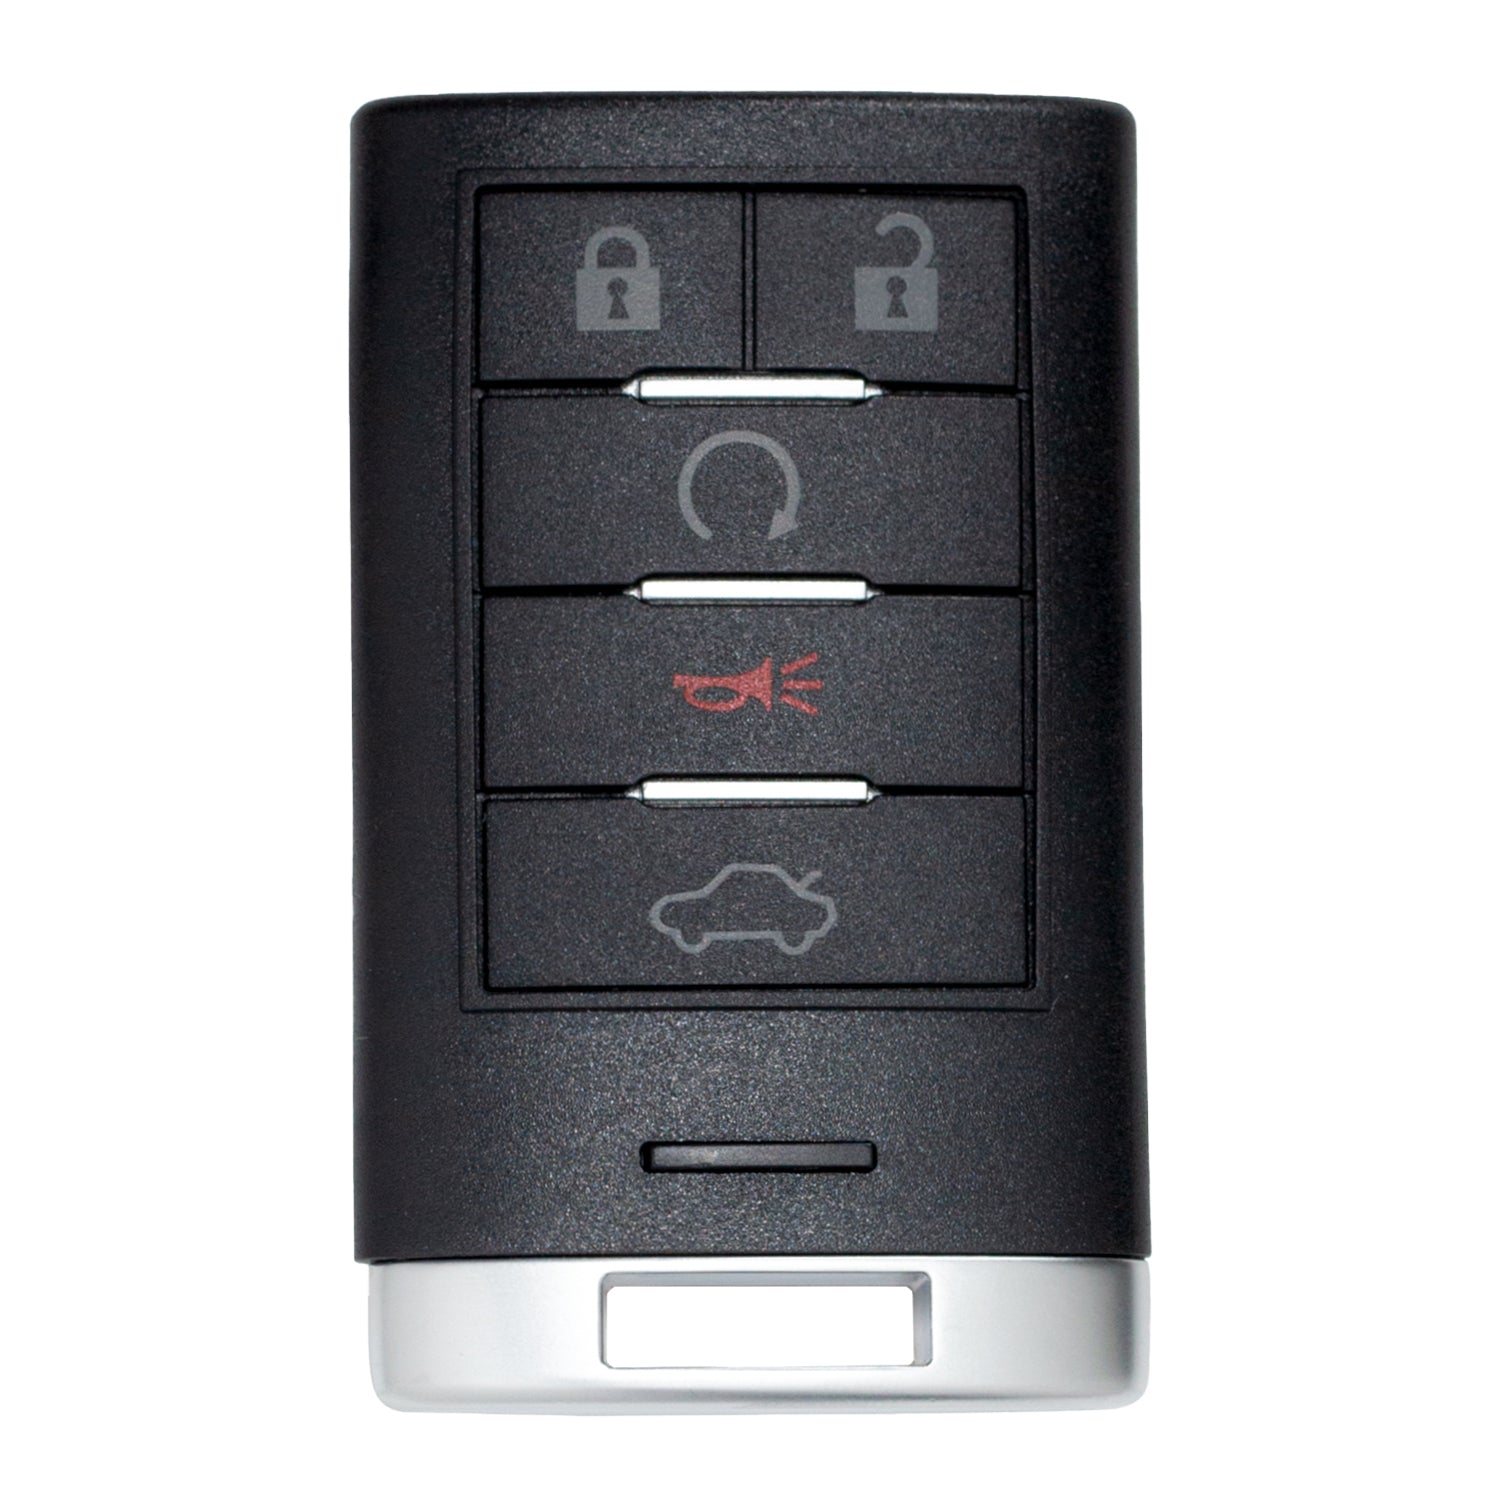 Car Keyless entry remote key for Cadillac STS CTS 2008 2009 2010 2011 2012 2013 2014 M3N5WY7777A 25943676 315 MHz (Complete Unit)